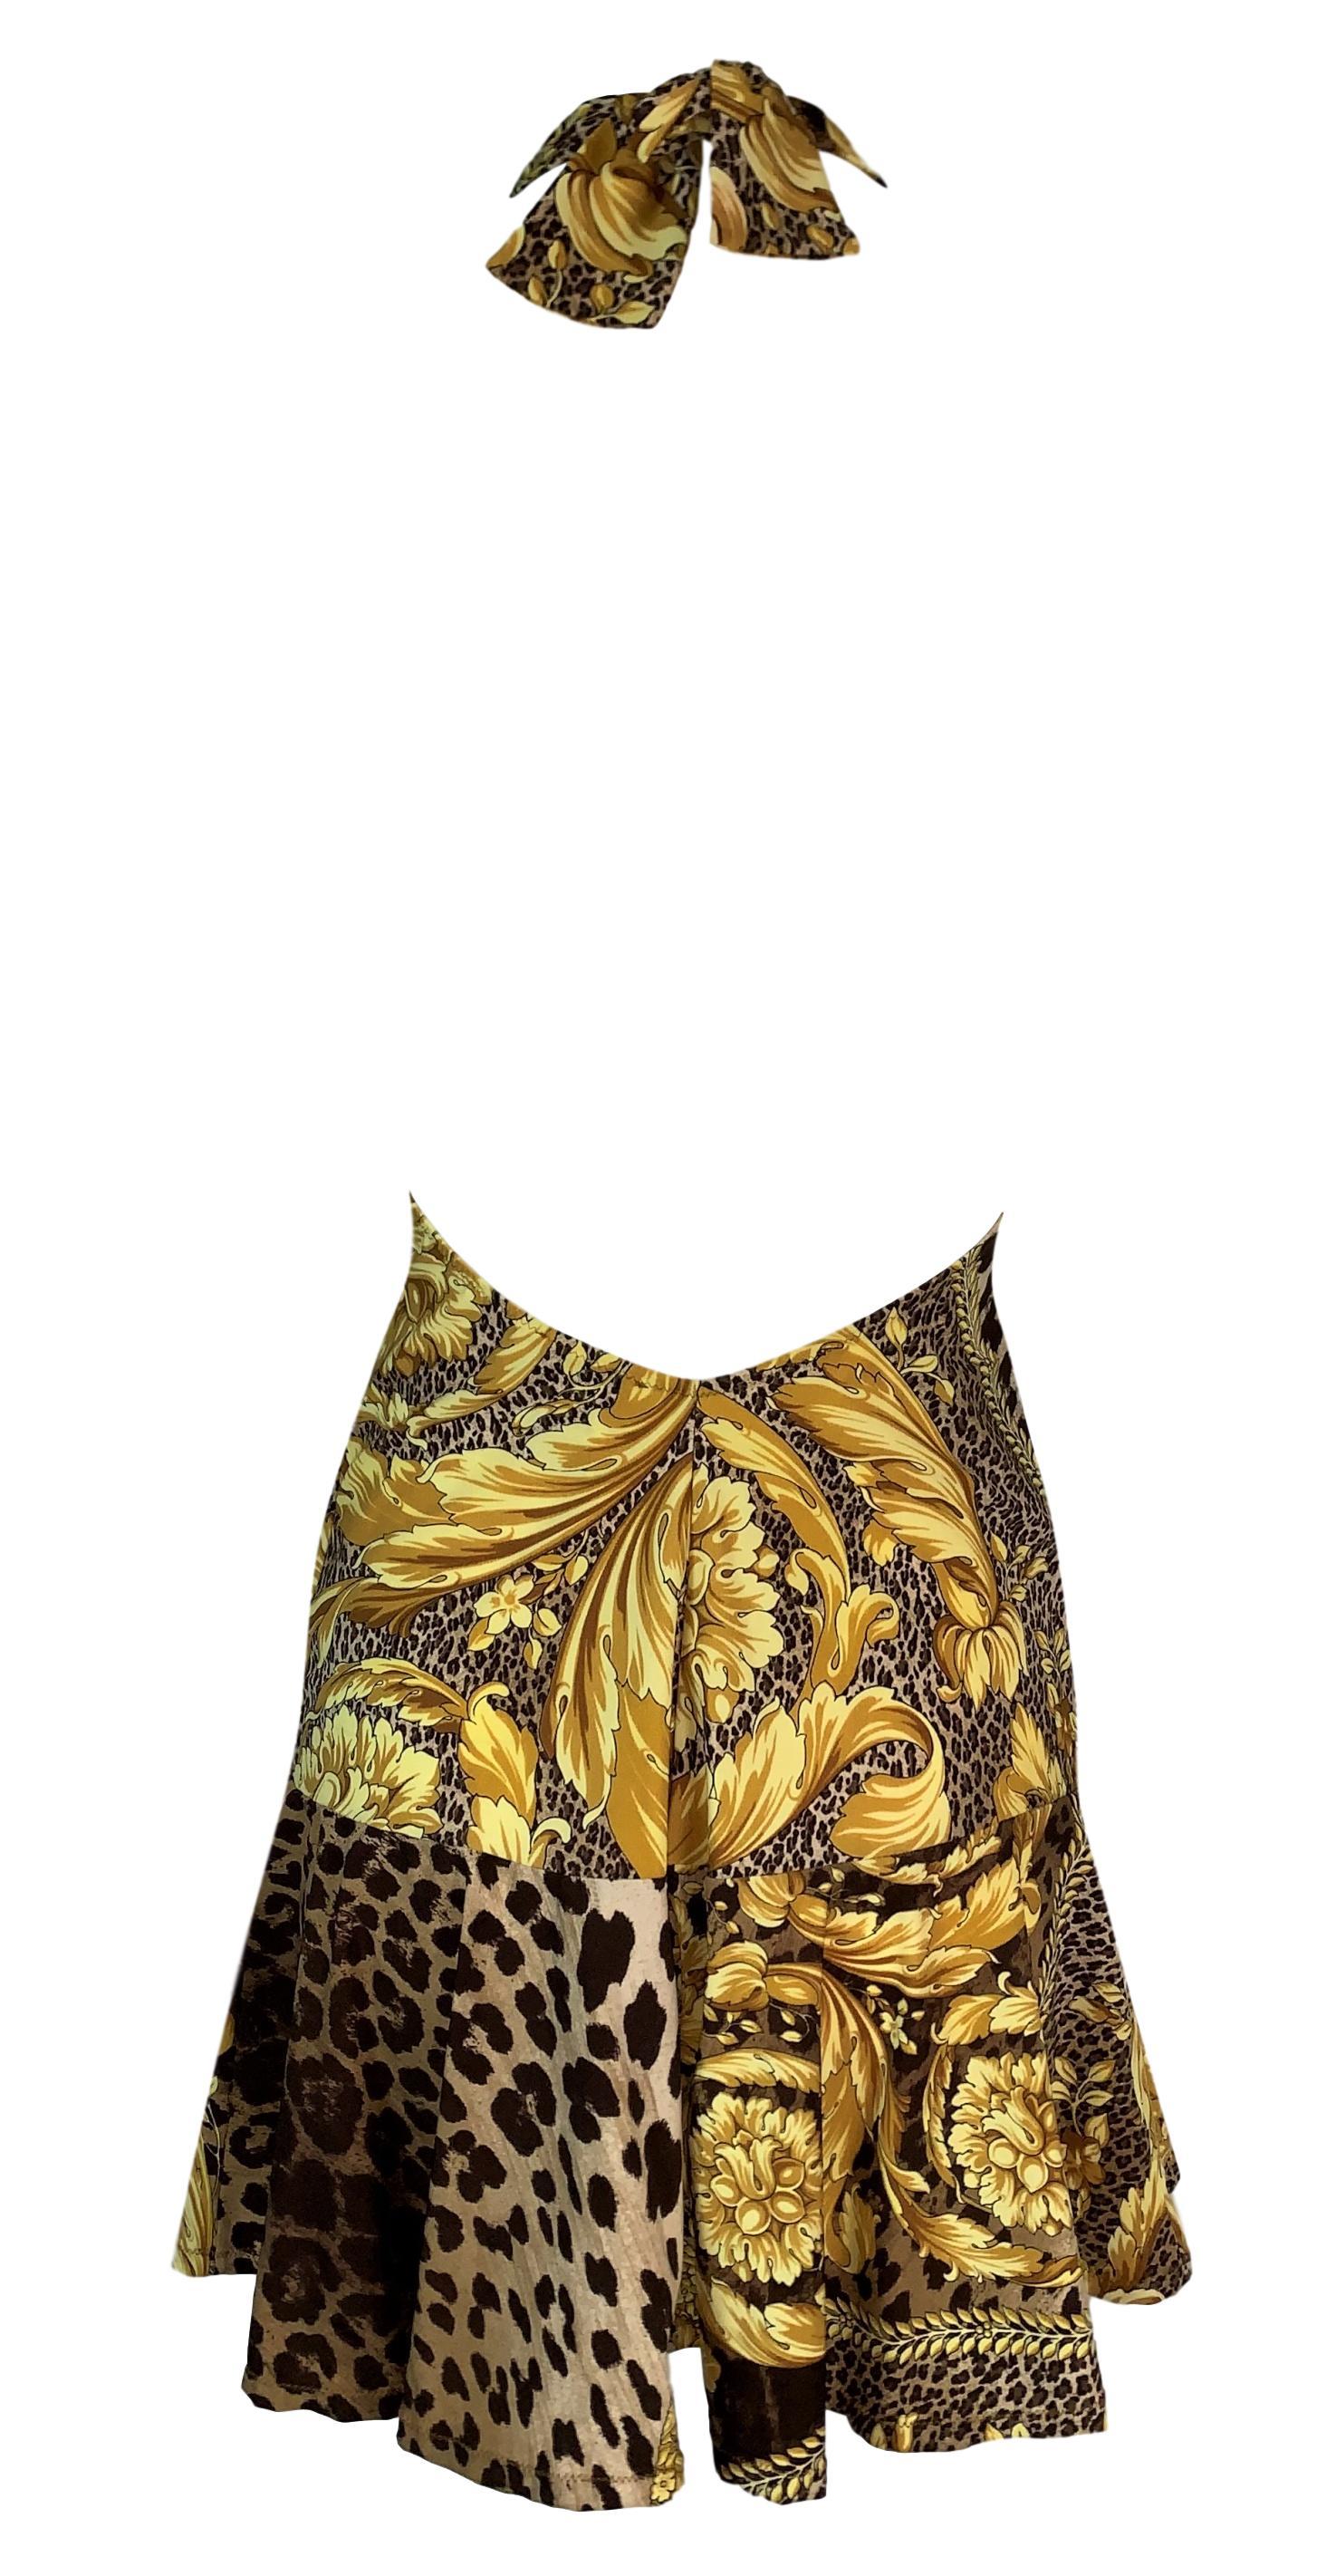 DESIGNER: S/S 2001 Versace

Please contact for more information and/or photos.

CONDITION: Unworn

FABRIC: Nylon & Spandex

COUNTRY MADE: Italy

SIZE: 40/S

MEASUREMENTS; provided as a courtesy only- not a guarantee of fit:

Chest: open, Waist: